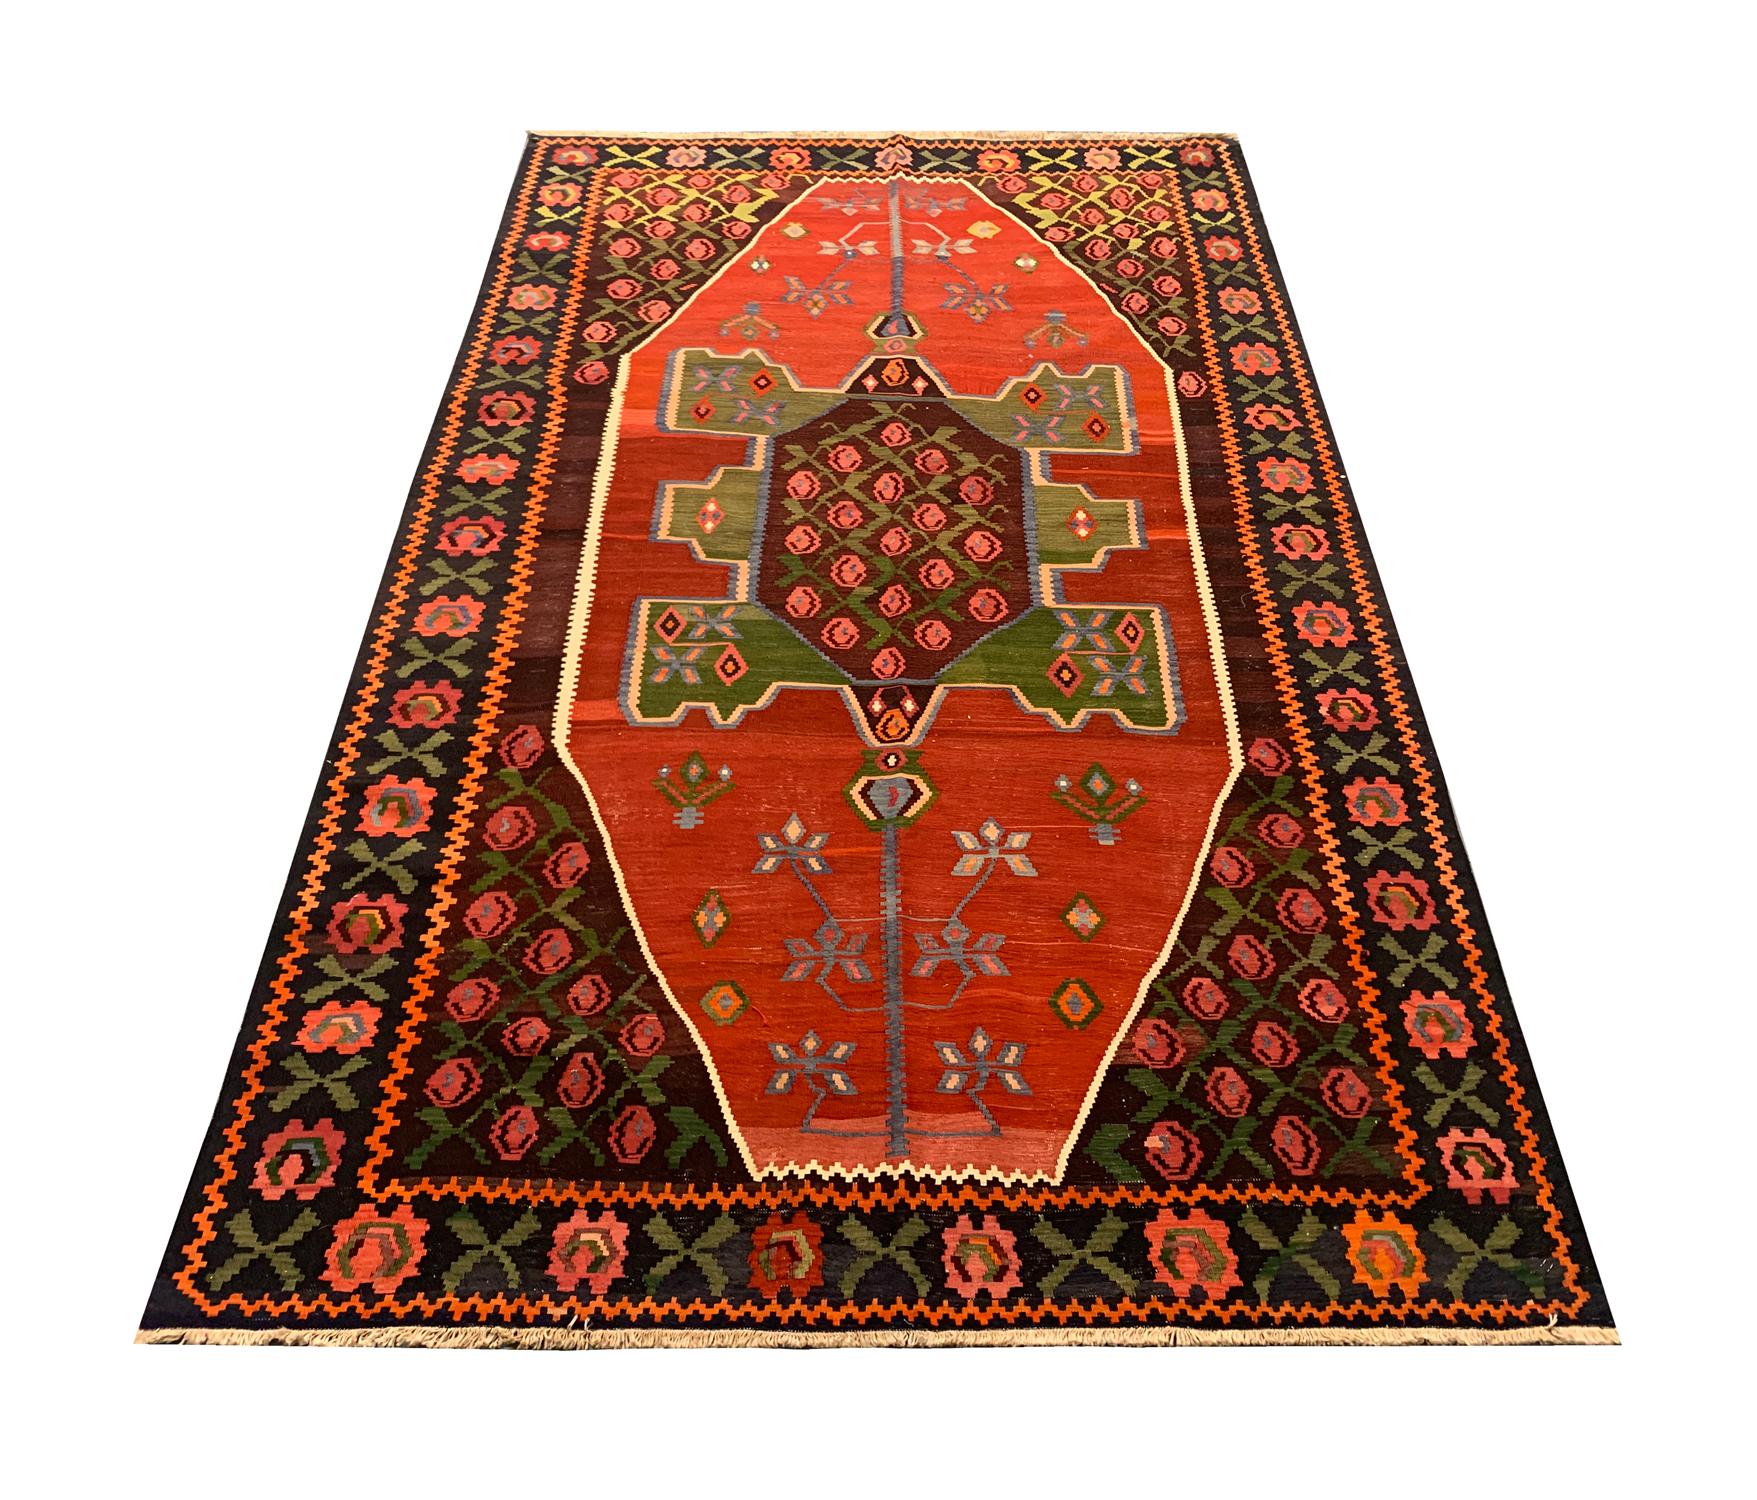 This beautiful antique Kilim is a fine example of a Caucasian Karabagh rug, woven in 1910 with fine hand-spun wool dyed with organic vegetable dyeing techniques. Red and brown open fields are decorated with floral motifs and medallions in green,